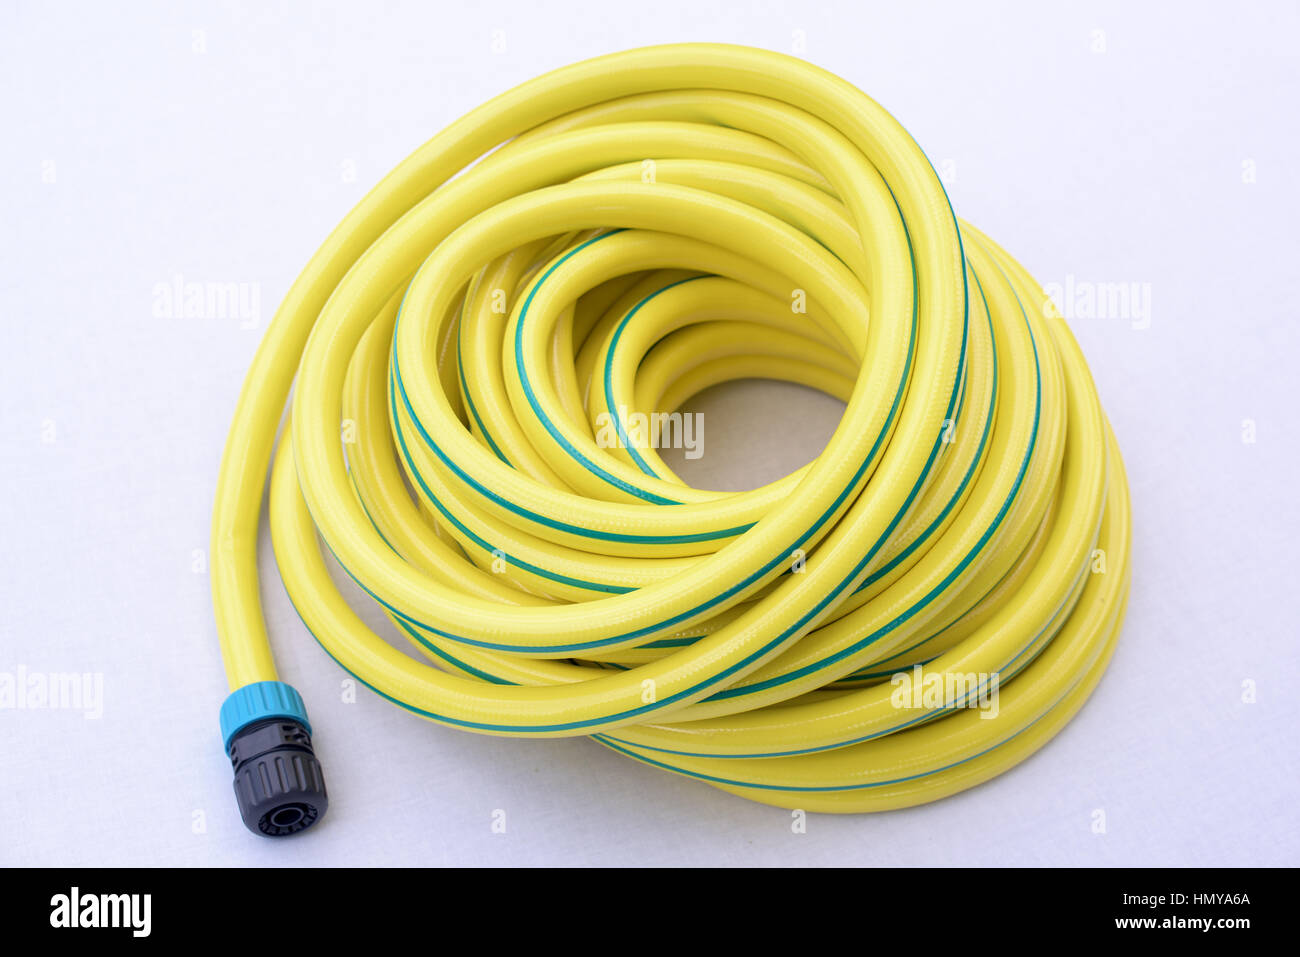 Garden hose-pipe whit coupling on a white background Stock Photo